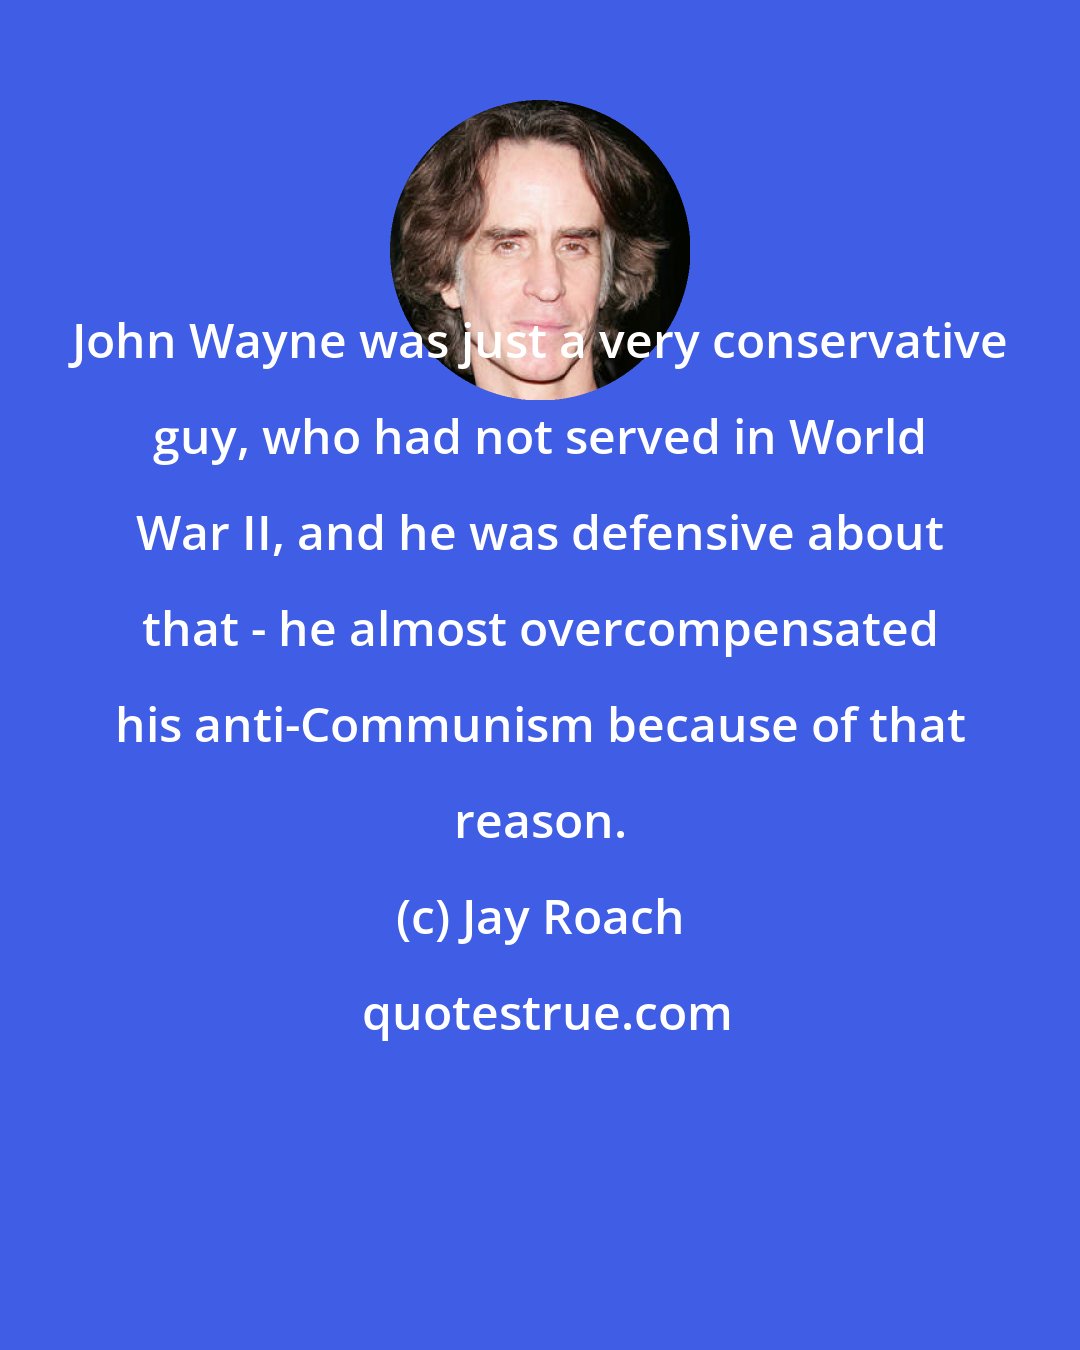 Jay Roach: John Wayne was just a very conservative guy, who had not served in World War II, and he was defensive about that - he almost overcompensated his anti-Communism because of that reason.